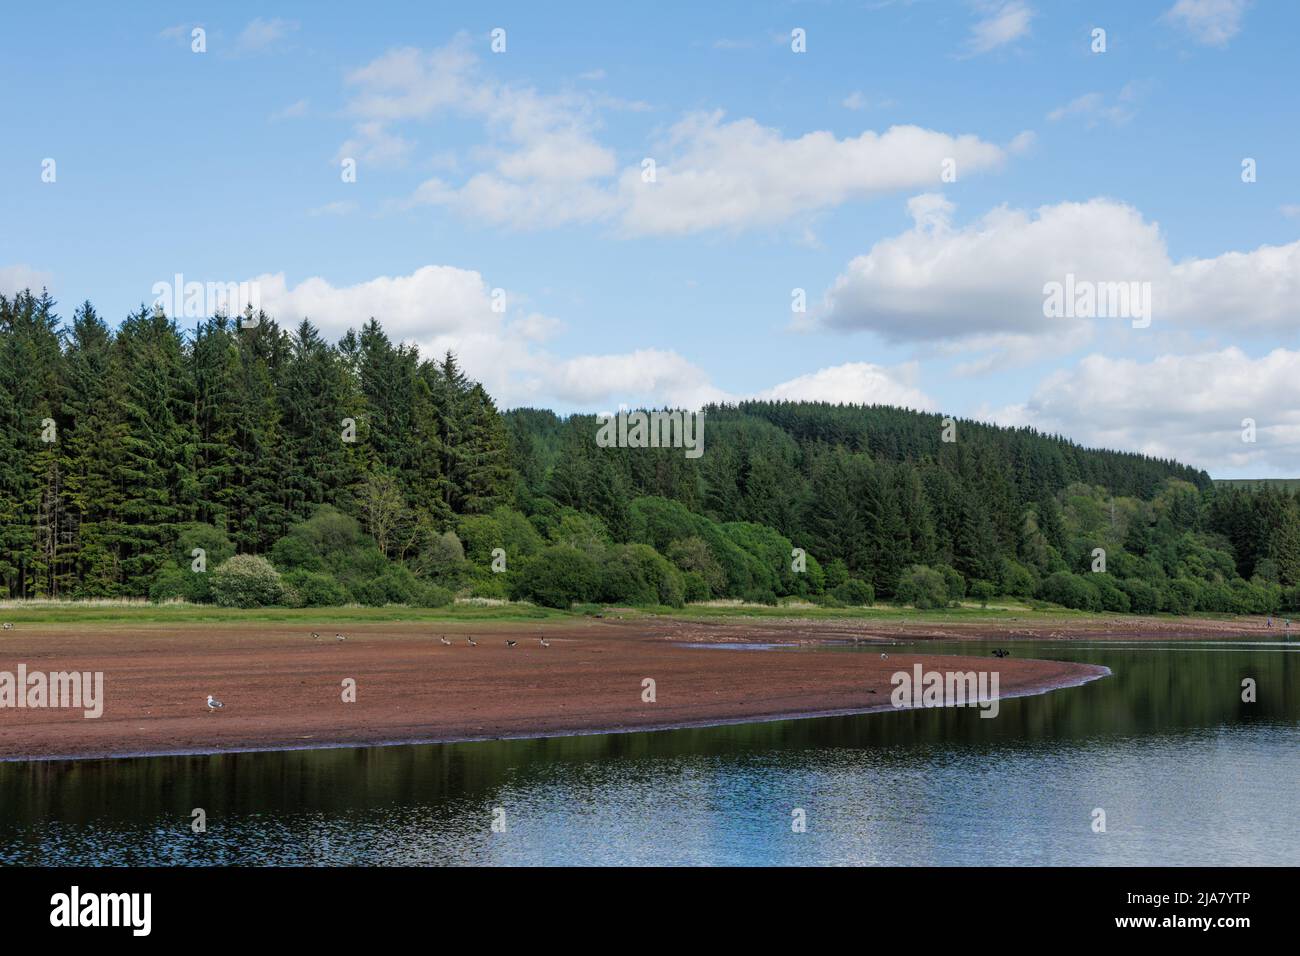 Llwyn Onn Reservoir, Merthyr Tydifl, South Wales, UK.  28 May 2022.  UK weather: Sunny afternoon over the reservoir today.  Water levels are lower than normal, and partially uncovered Pont Yr Daf bridge that was in use before the reservoir was constructed.  Credit: Andrew Bartlett/Alamy Live News. Stock Photo